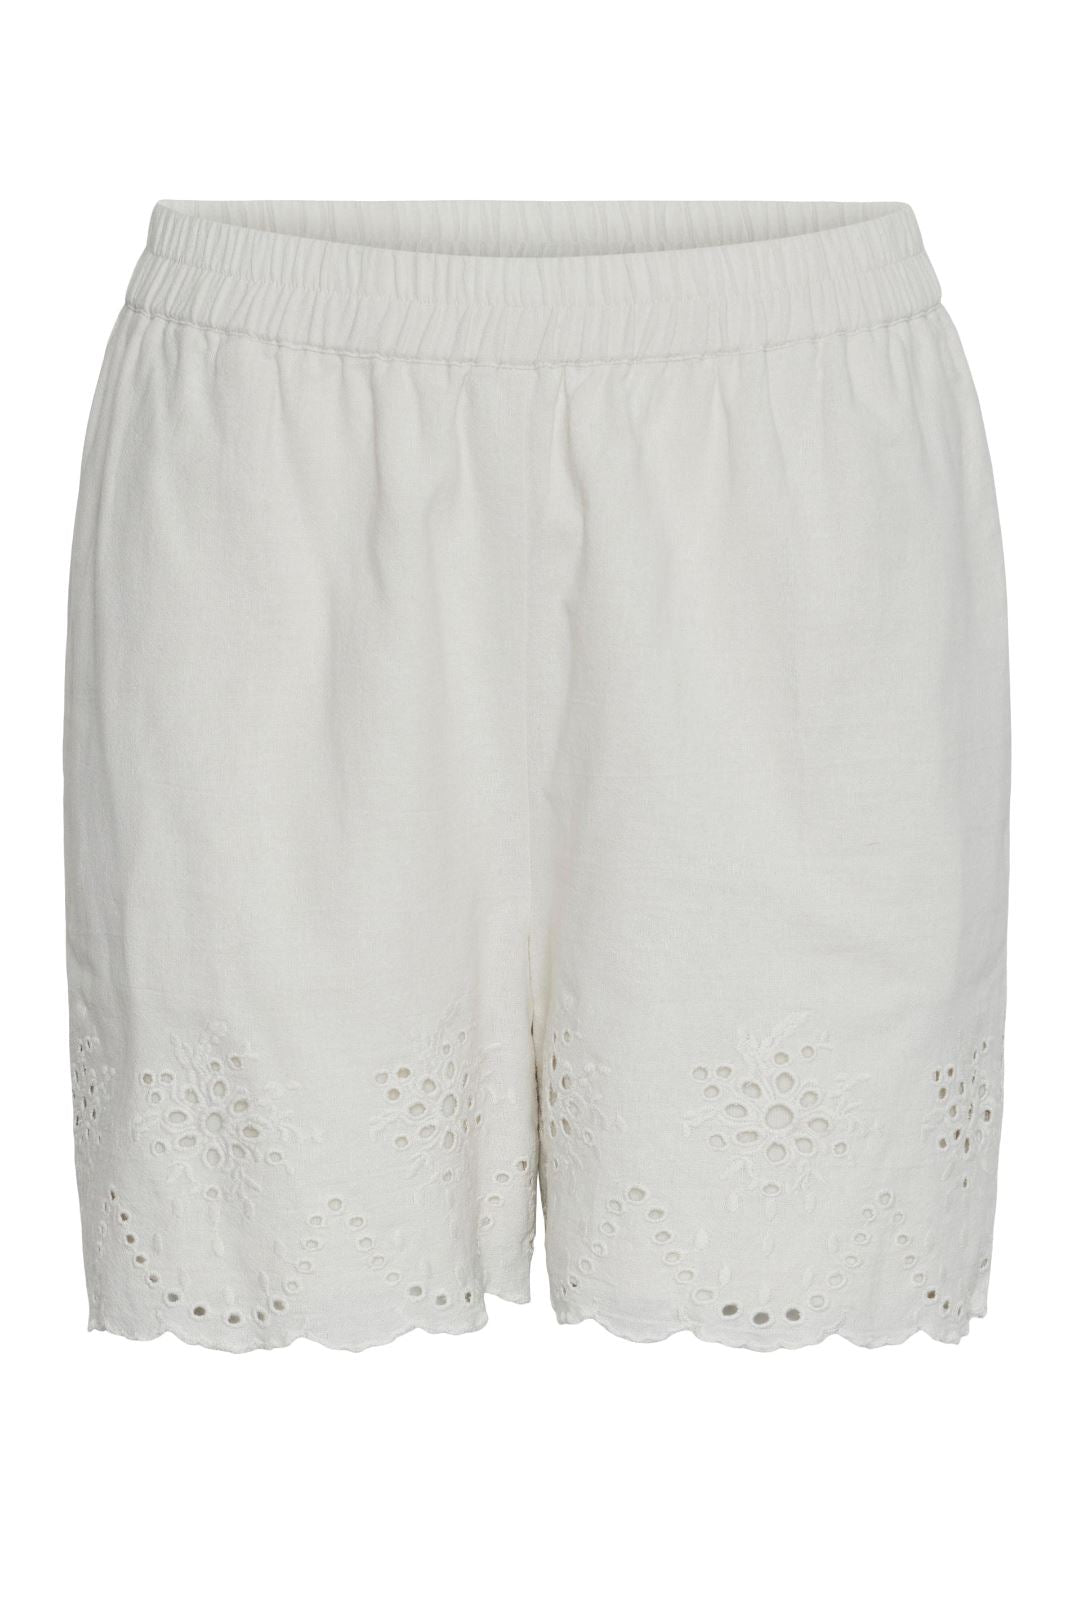 Pieces - Pcalmina Embroidery Shorts - 4486666 Birch Shorts 